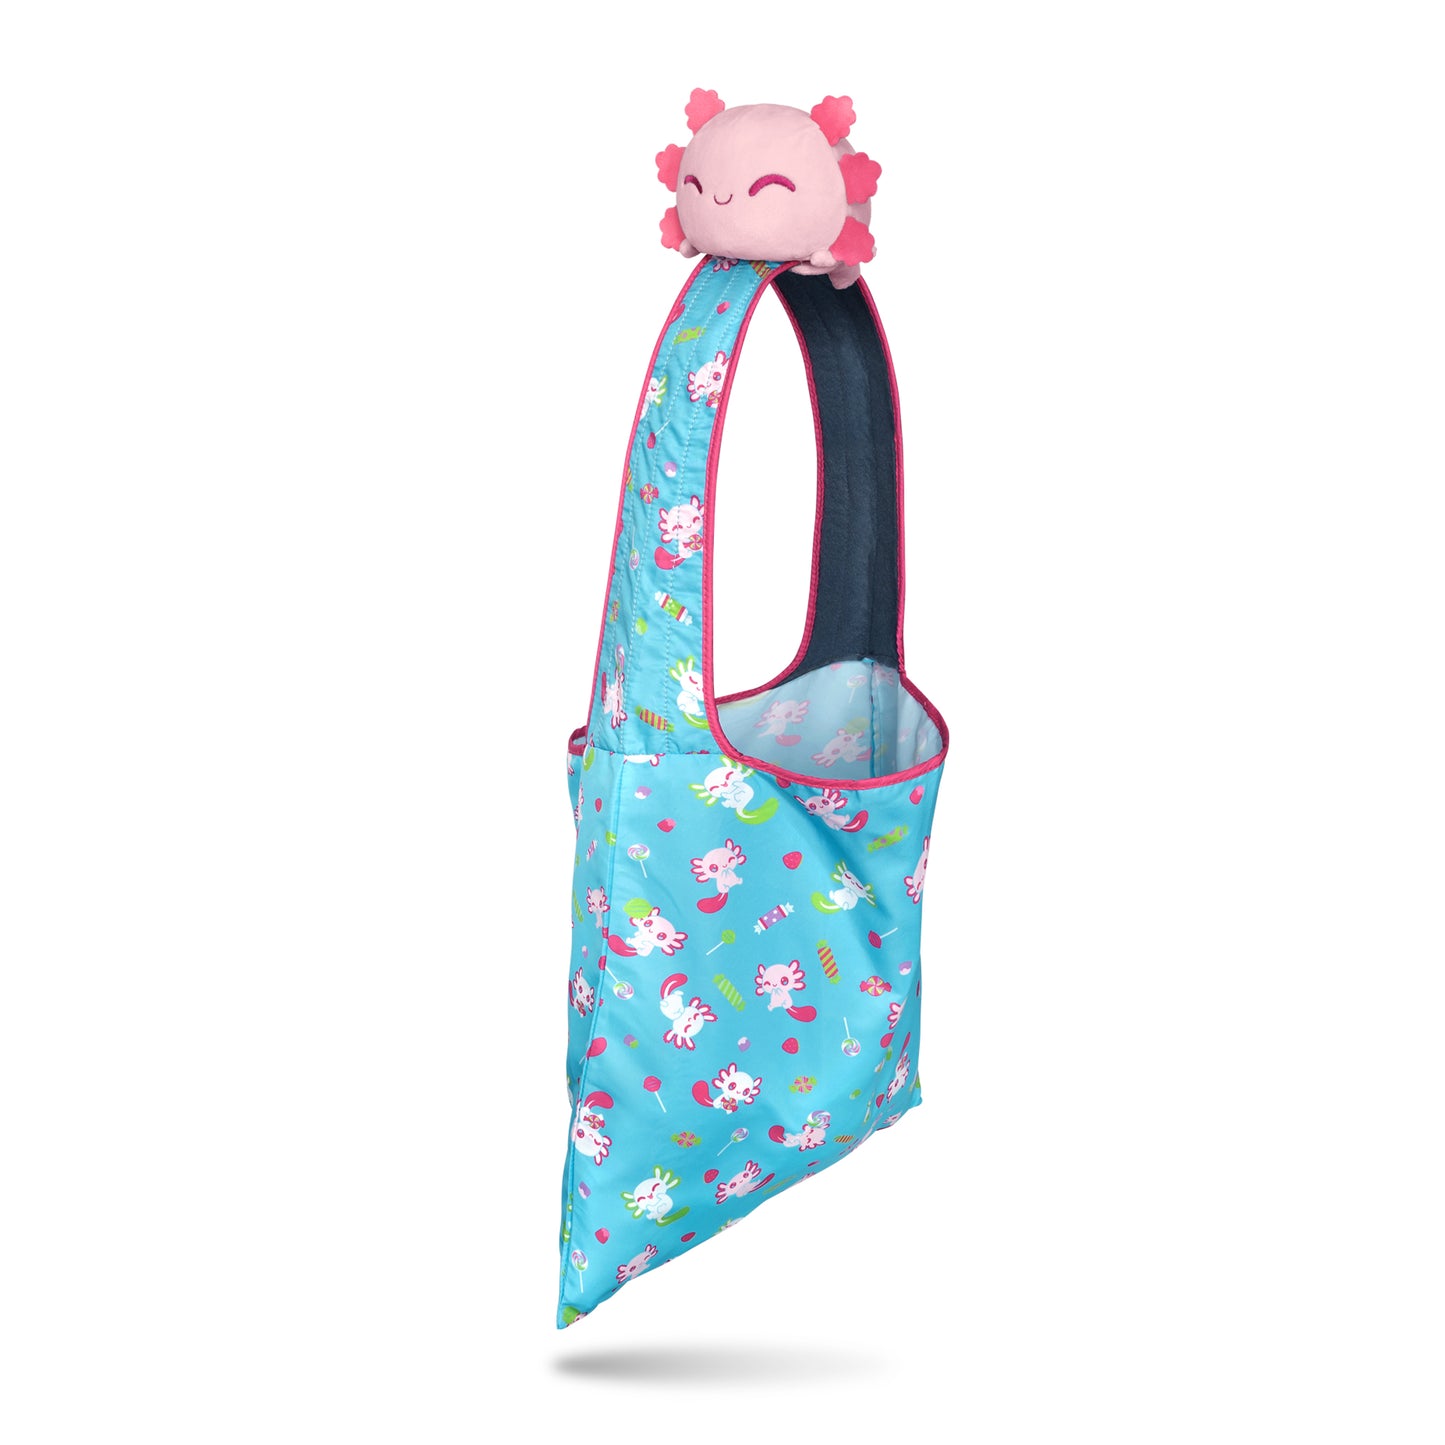 A blue Plushiverse Alotl Candy plushie tote bag with a TeeTurtle plushie on top, perfect for a secret tote bag.